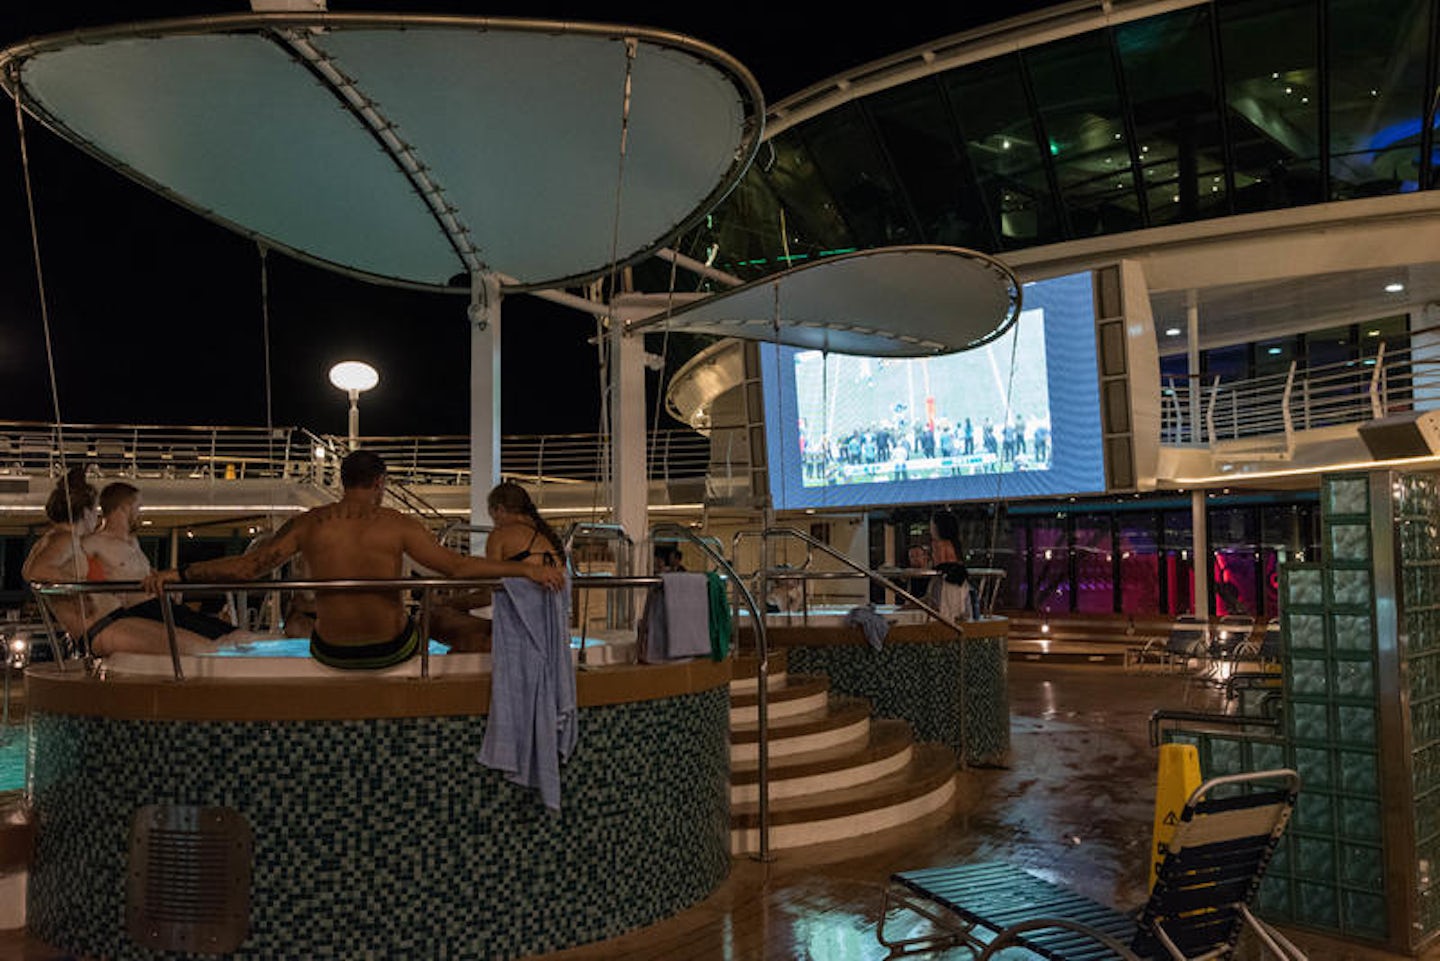 Outdoor Movie Screen on Brilliance of the Seas